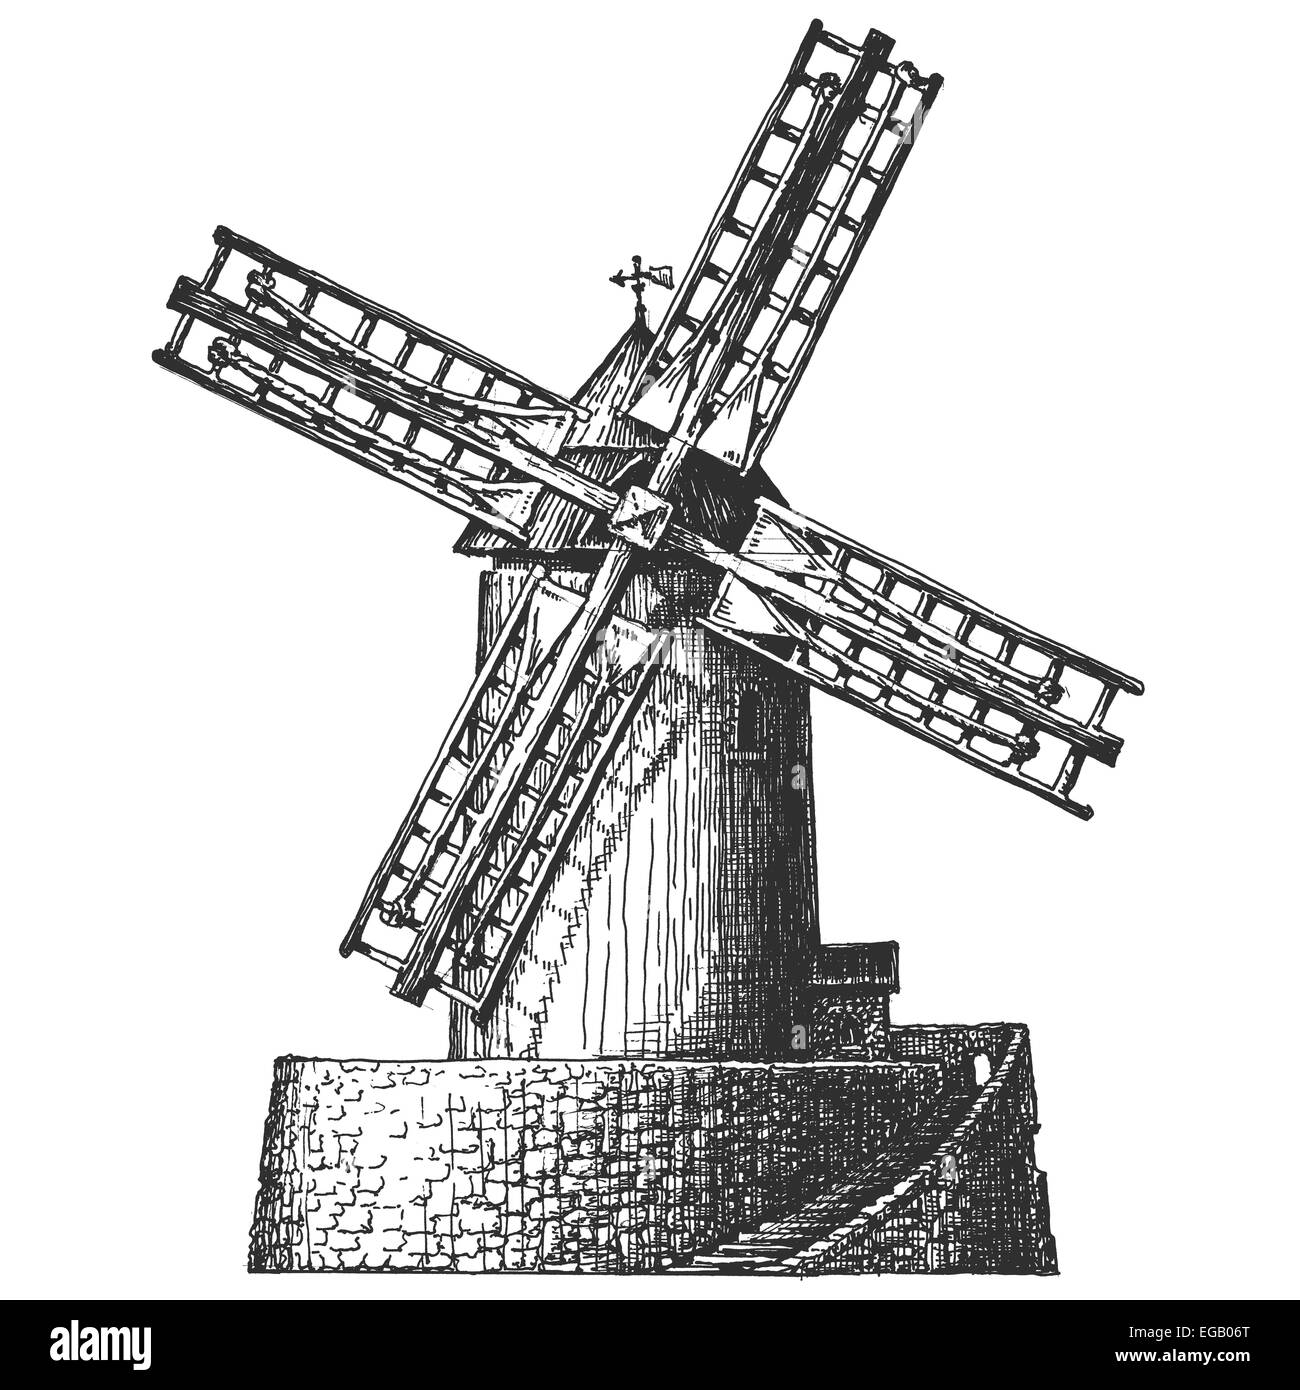 sketch. Old windmill on a white background. vector illustration Stock Photo